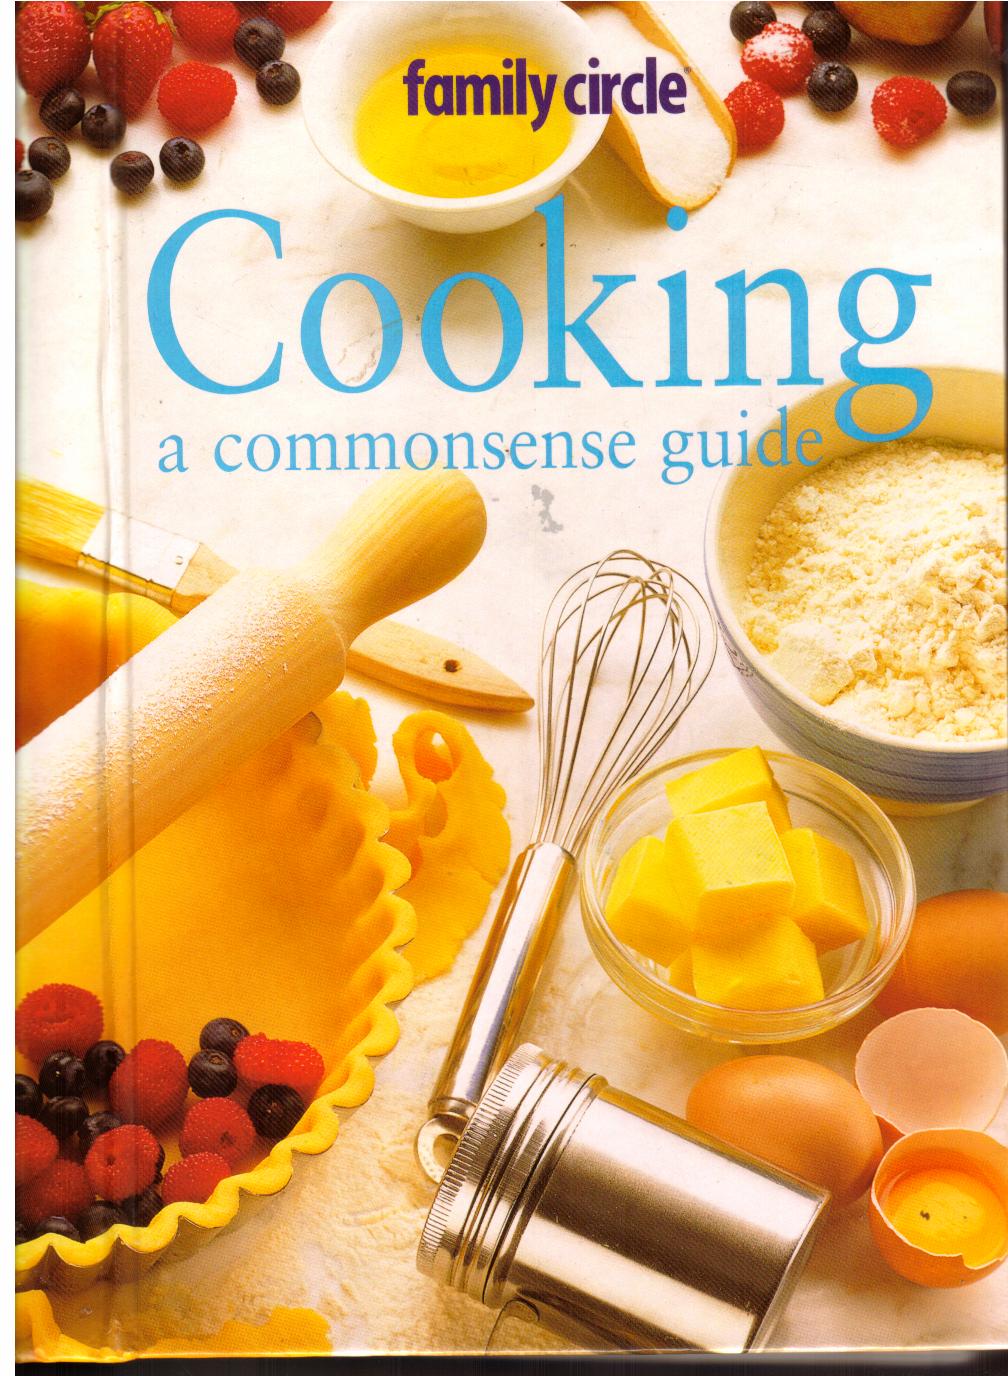 Pdf готовка. Cooking pdf. Cooking book. Cook book Series. Pdf cook